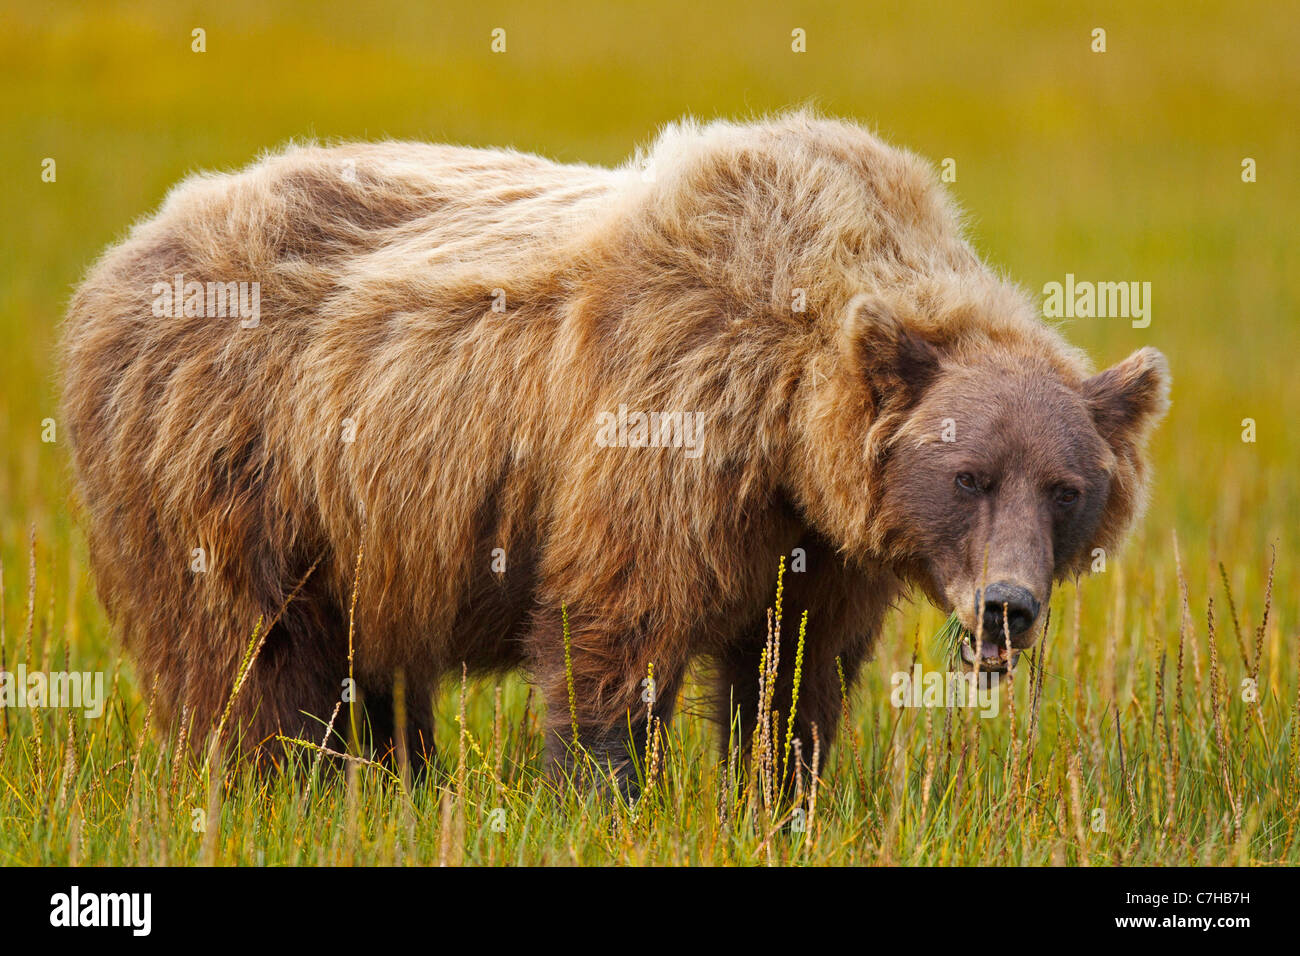 North American brown bear (Ursus arctos horribilis) sow stands in grassy field, Lake Clark National Park, Alaska, United States Stock Photo